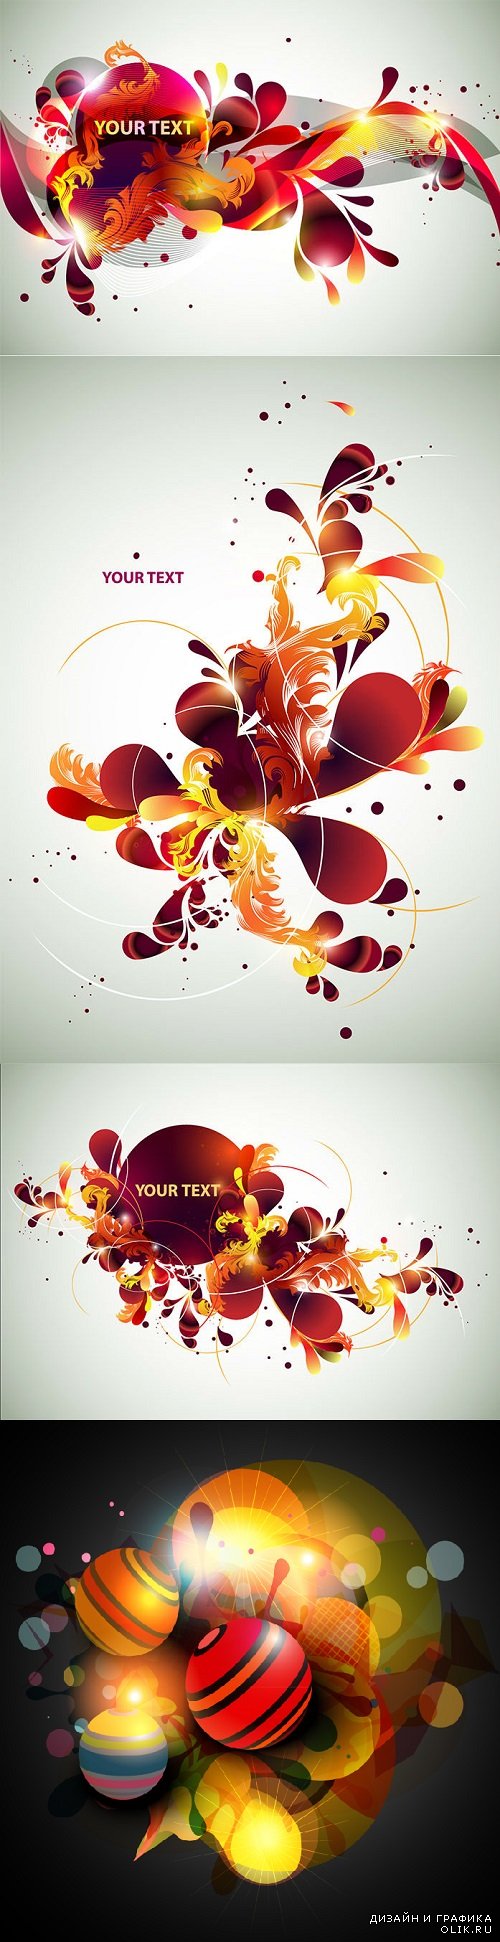 Vector - Abstract backgrounds for text